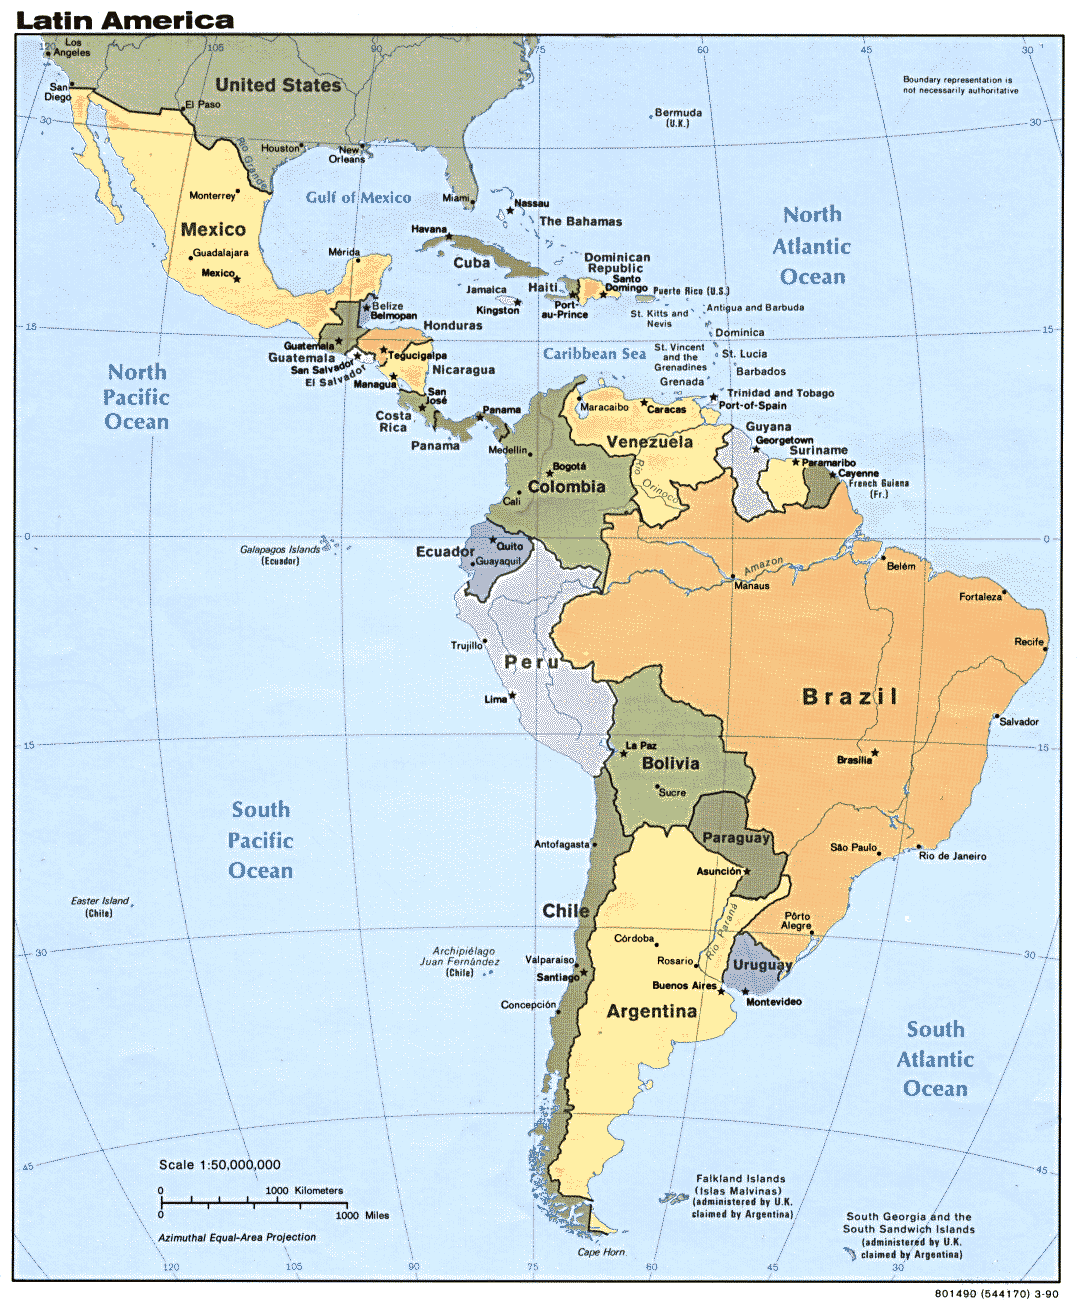 Download this Latin America Map See Details From Library Montclair Edu picture